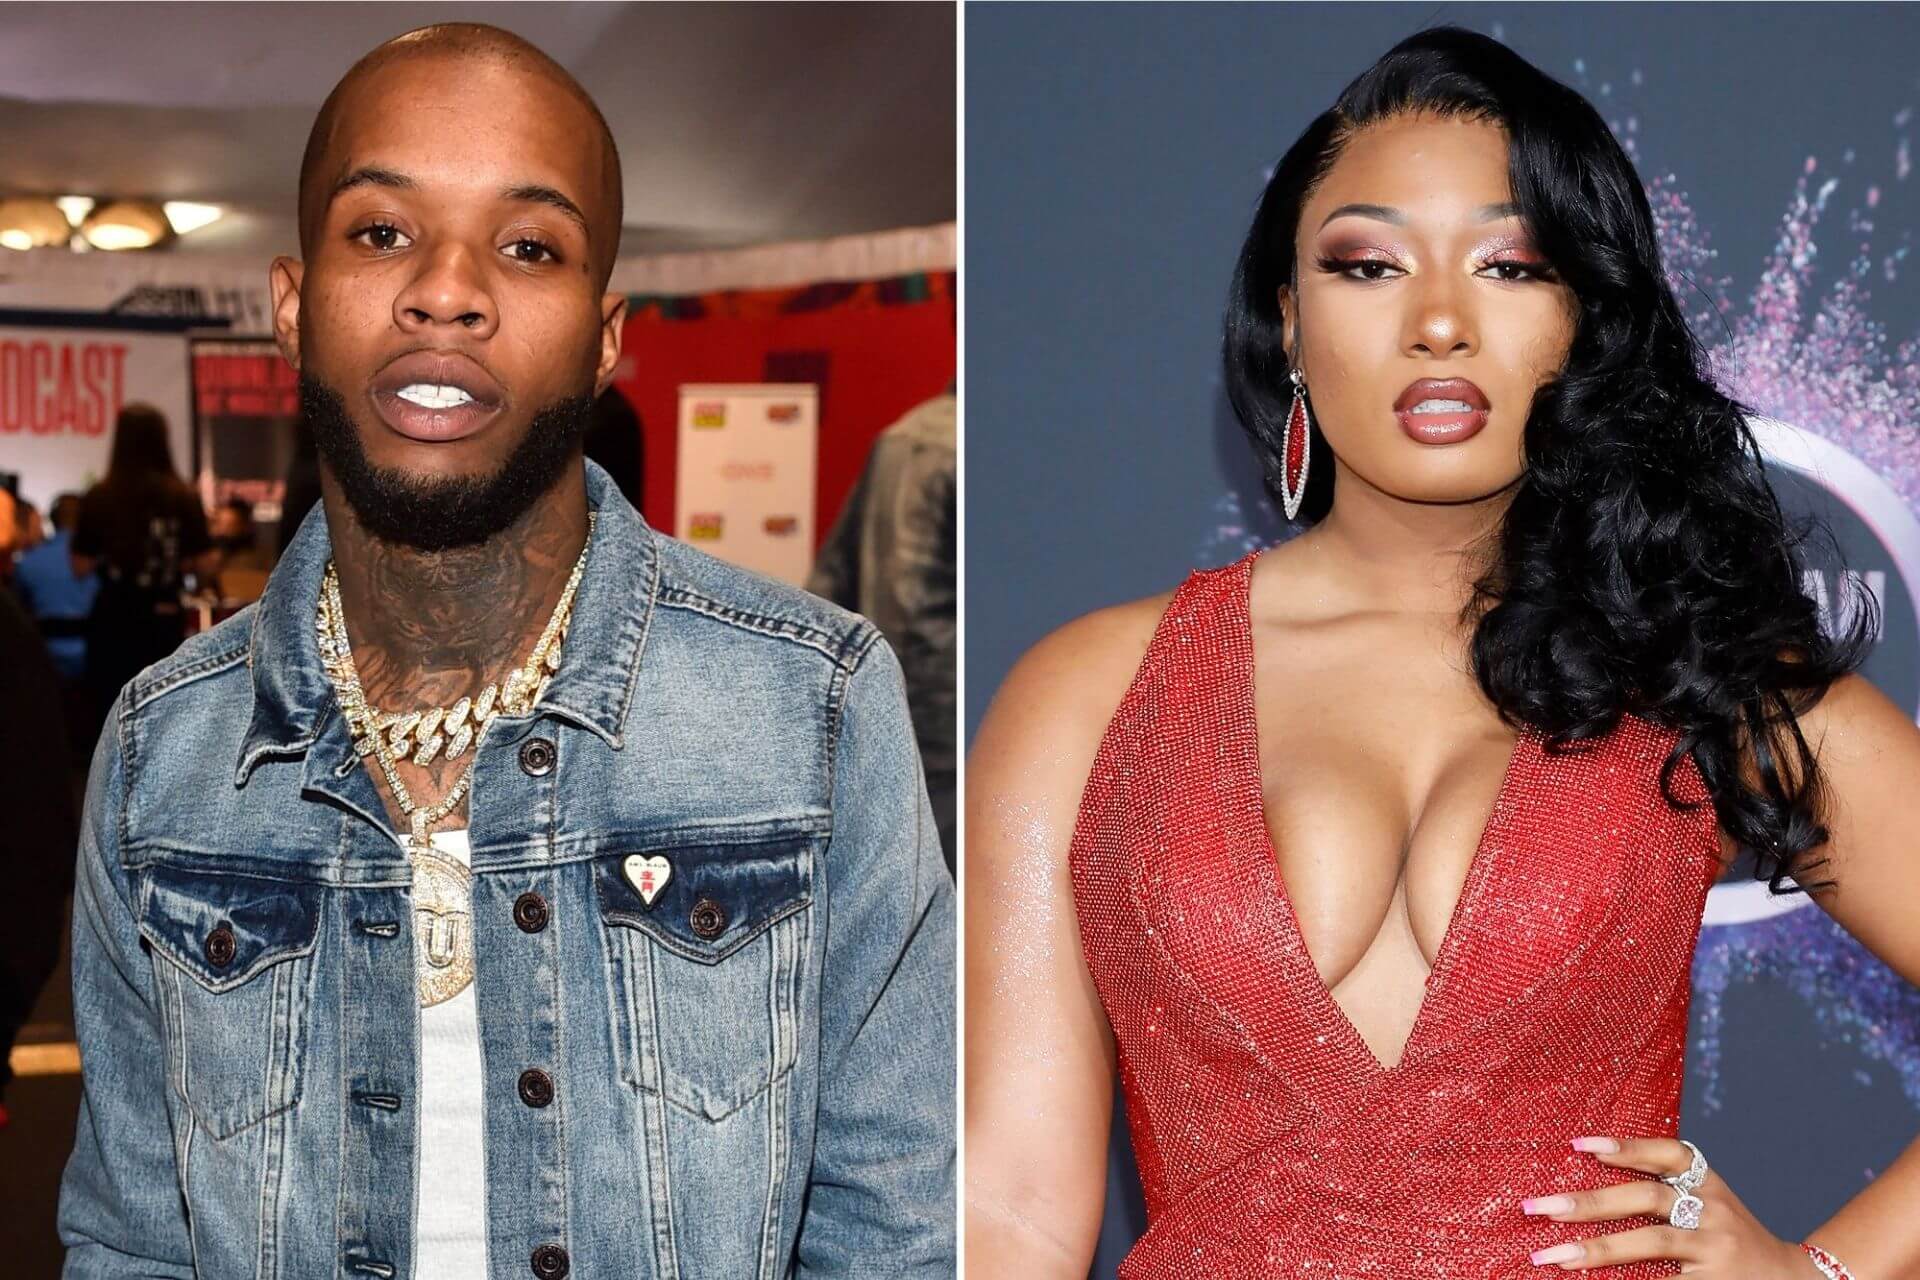 Tory Lanez reportedly texted an apology to Megan Thee Stallion after shooting